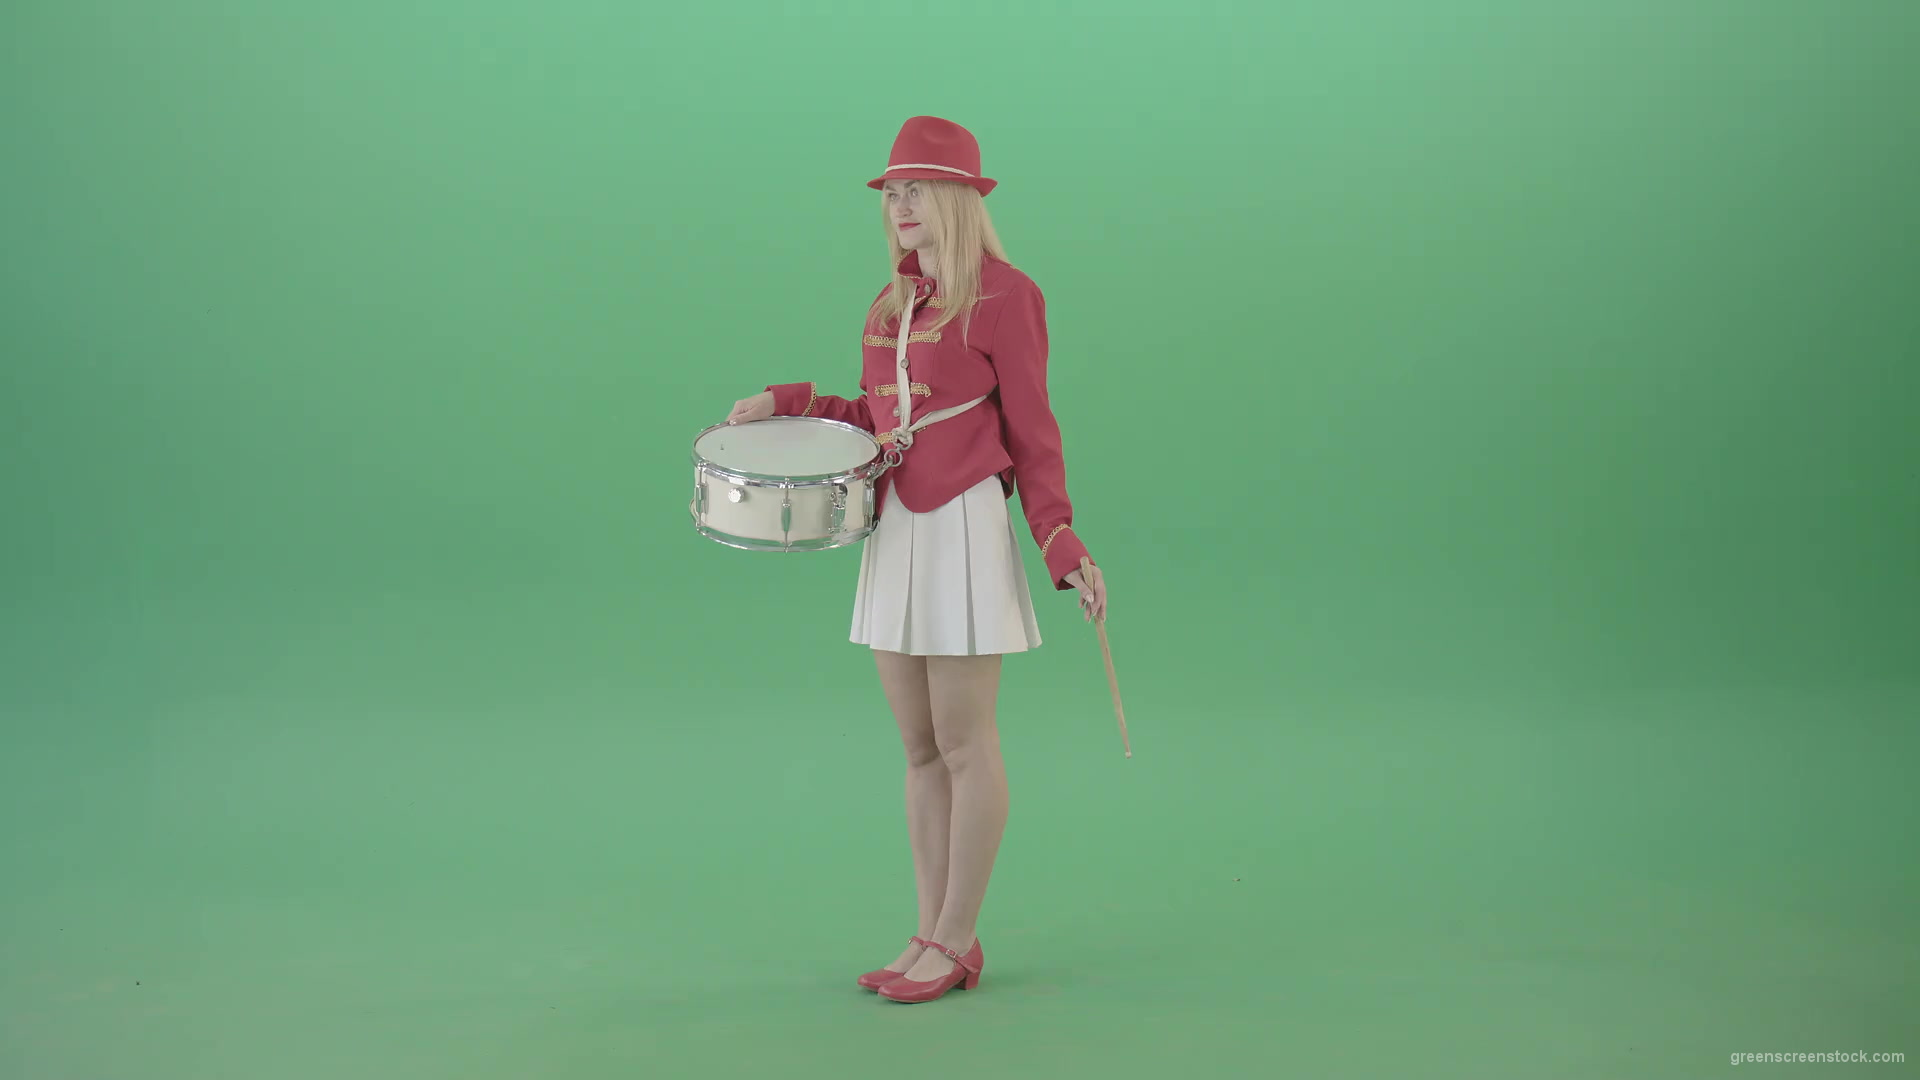 Red-Costume-Girl-in-Side-view-marching-on-green-screen-and-playing-snare-drum-4K-Video-Footage-1920_001 Green Screen Stock